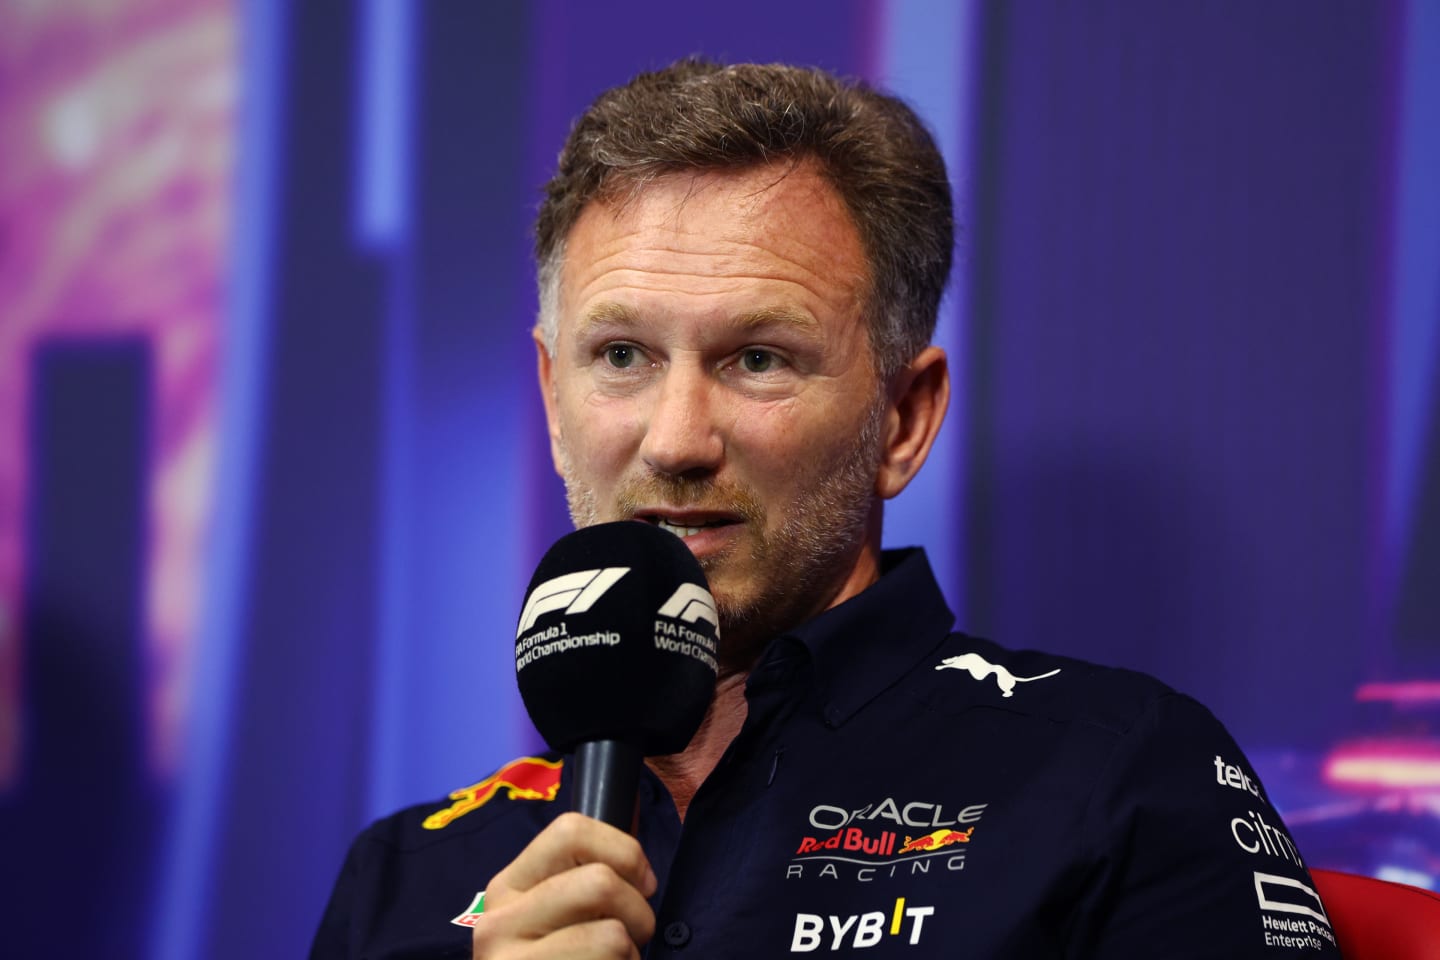 SINGAPORE, SINGAPORE - OCTOBER 01: Red Bull Racing Team Principal Christian Horner talks in the team principal's press conference before final practice ahead of the F1 Grand Prix of Singapore at Marina Bay Street Circuit on October 01, 2022 in Singapore, Singapore. (Photo by Clive Rose/Getty Images,)